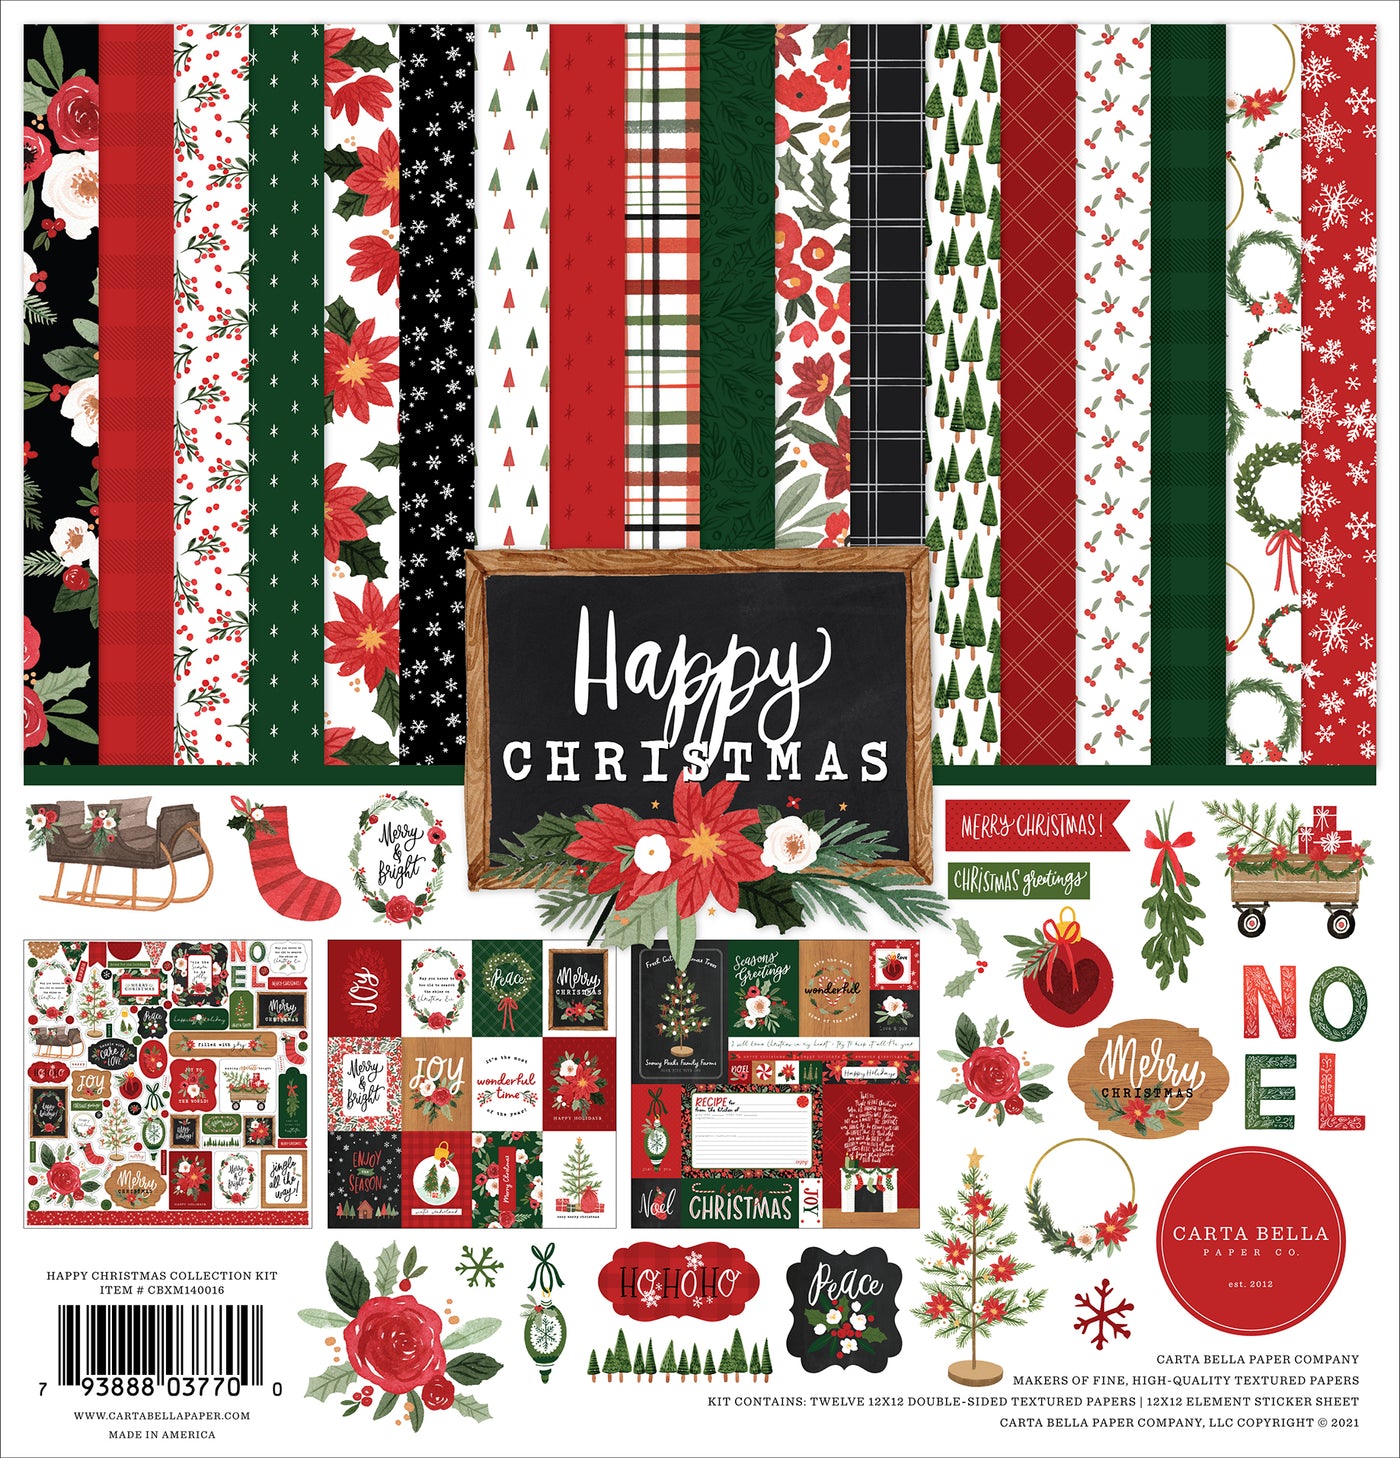 This 12" x 12" Collection Kit is part of the Happy Christmas Collection from Carta Bella Paper and Echo Park. 